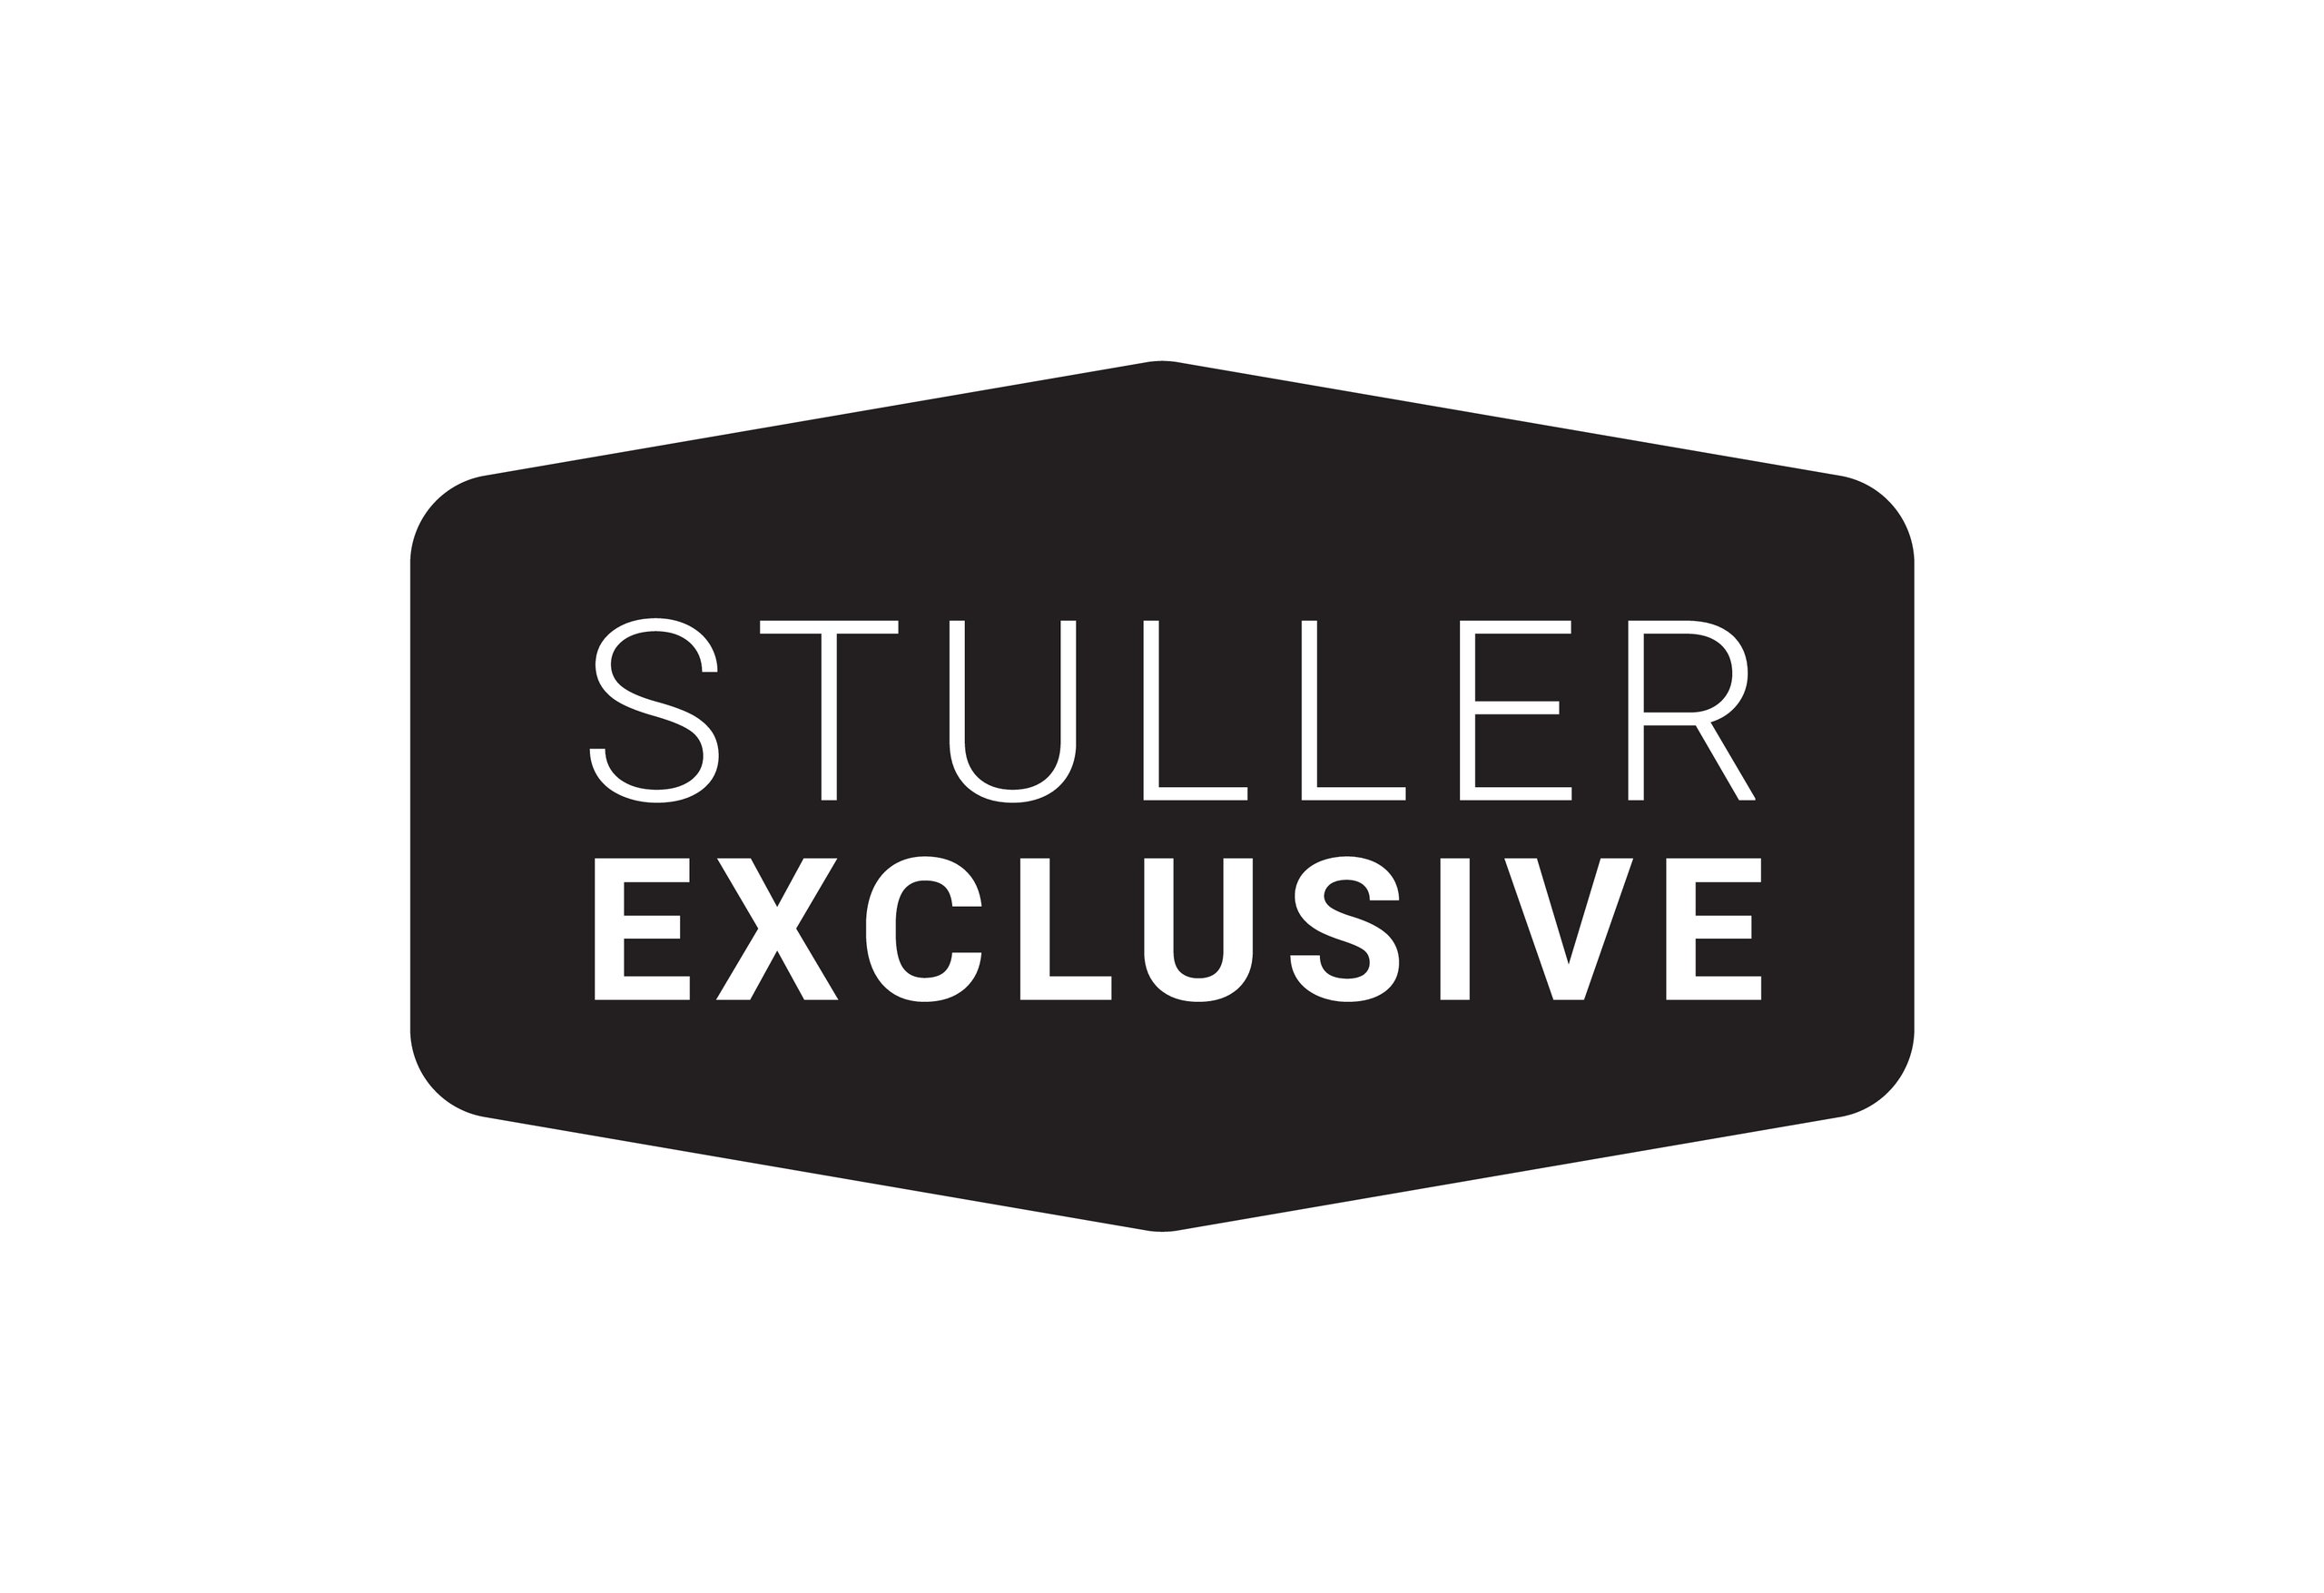 Top 5 Jewelry Tools You Can Only Get from Stuller